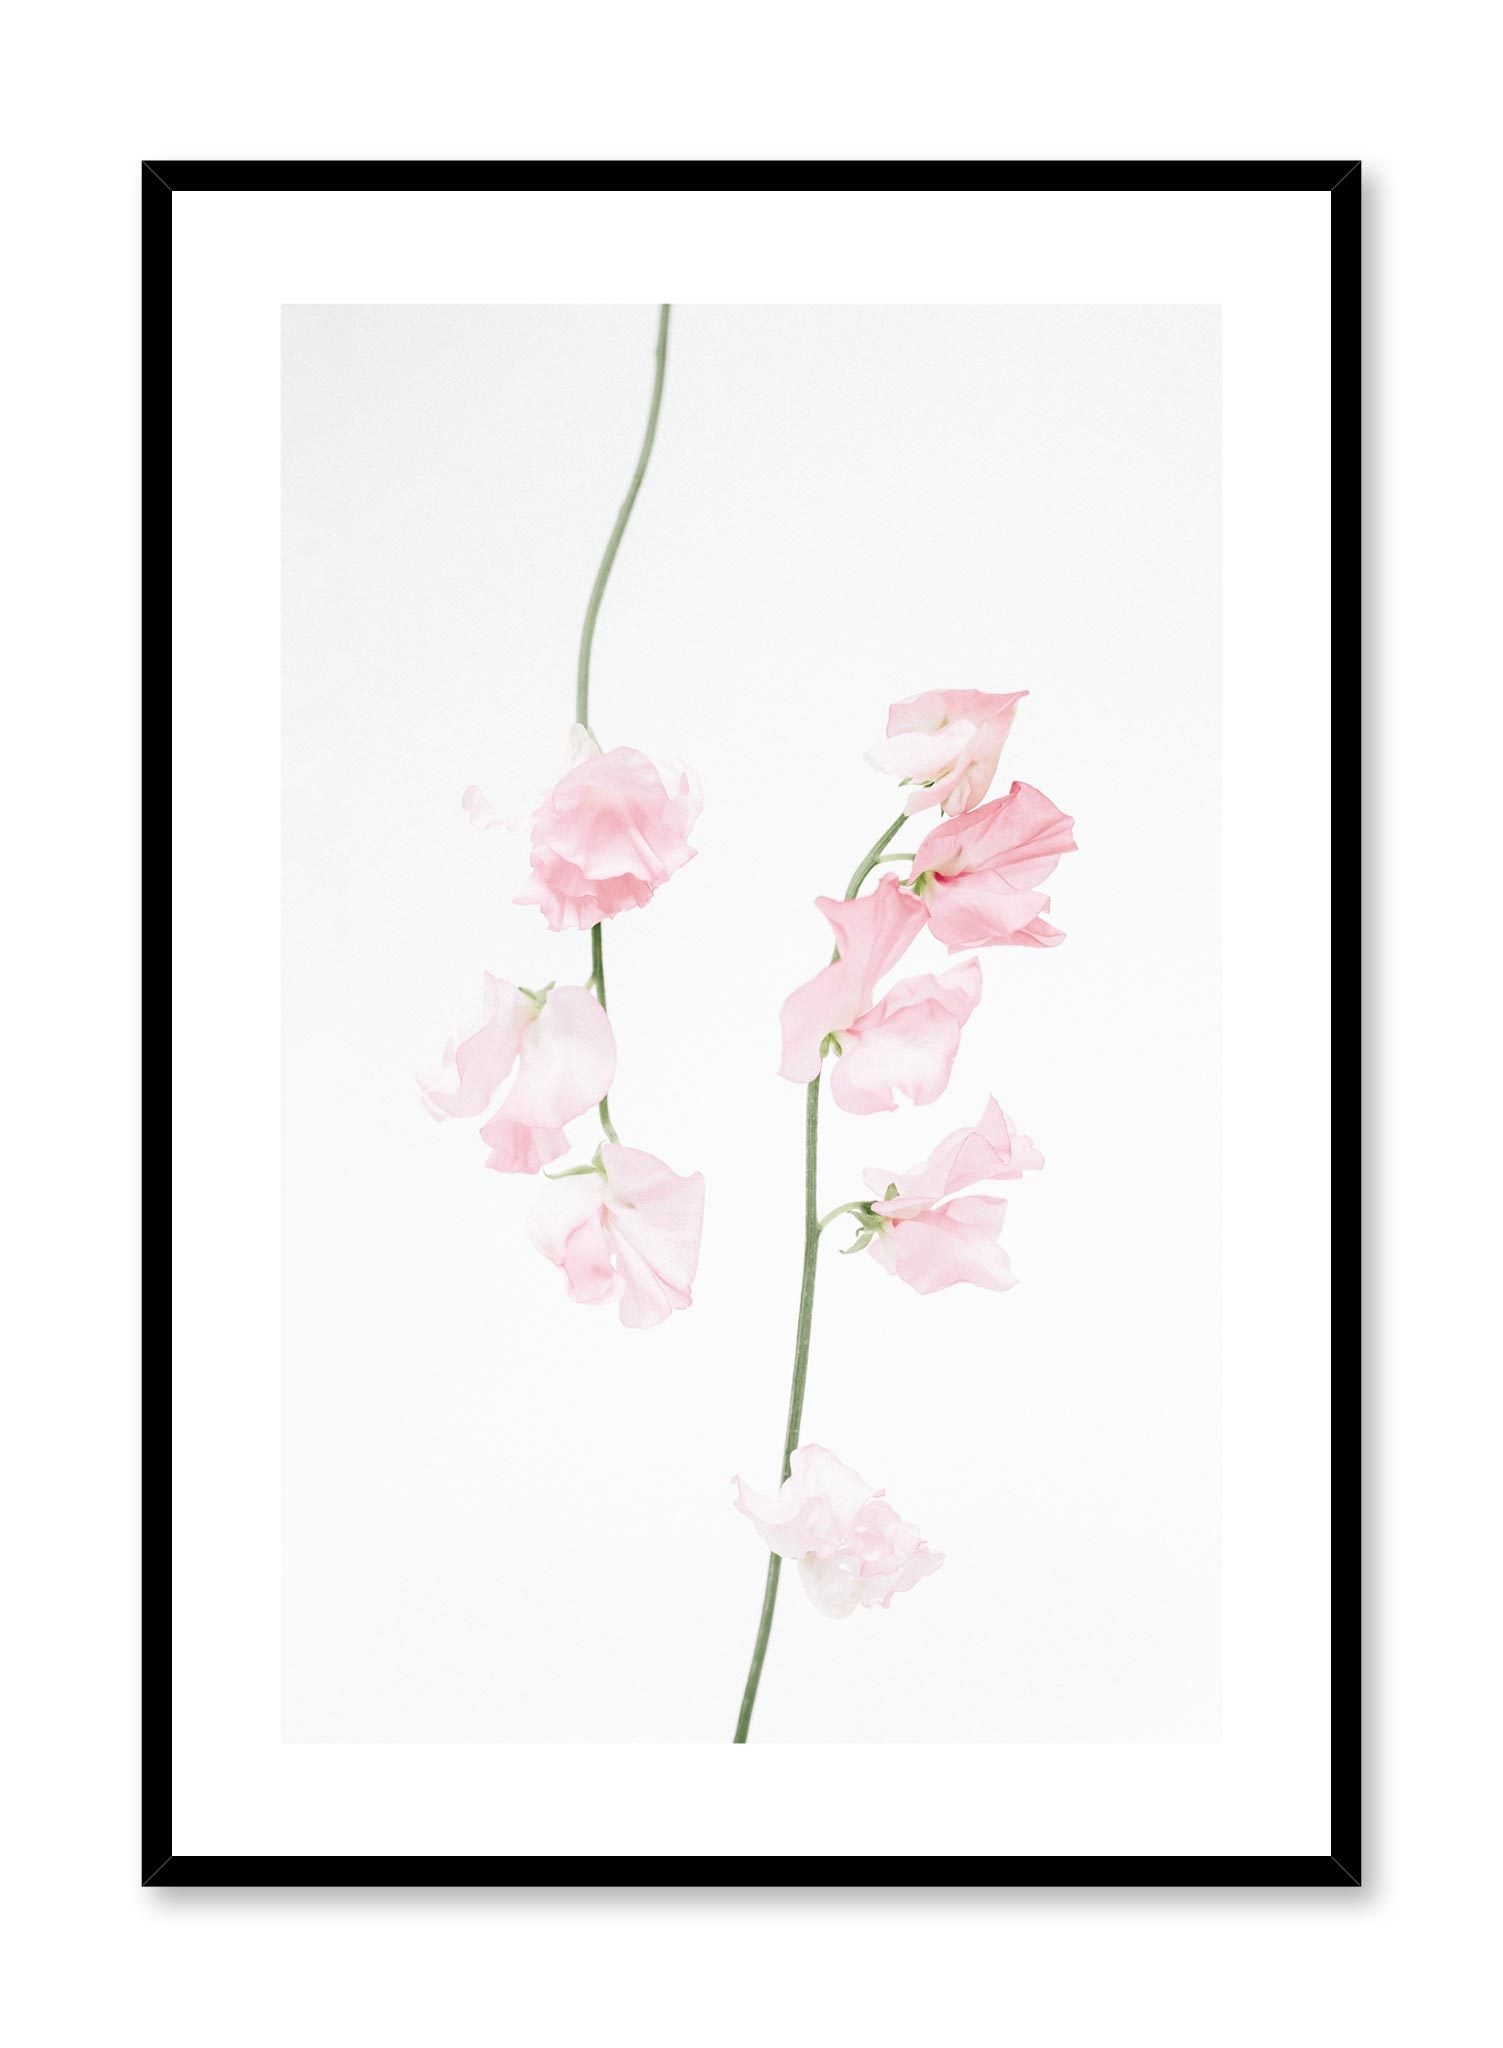 Minimalistic wall poster by Opposite Wall with dusty pink sweet pea floral photography